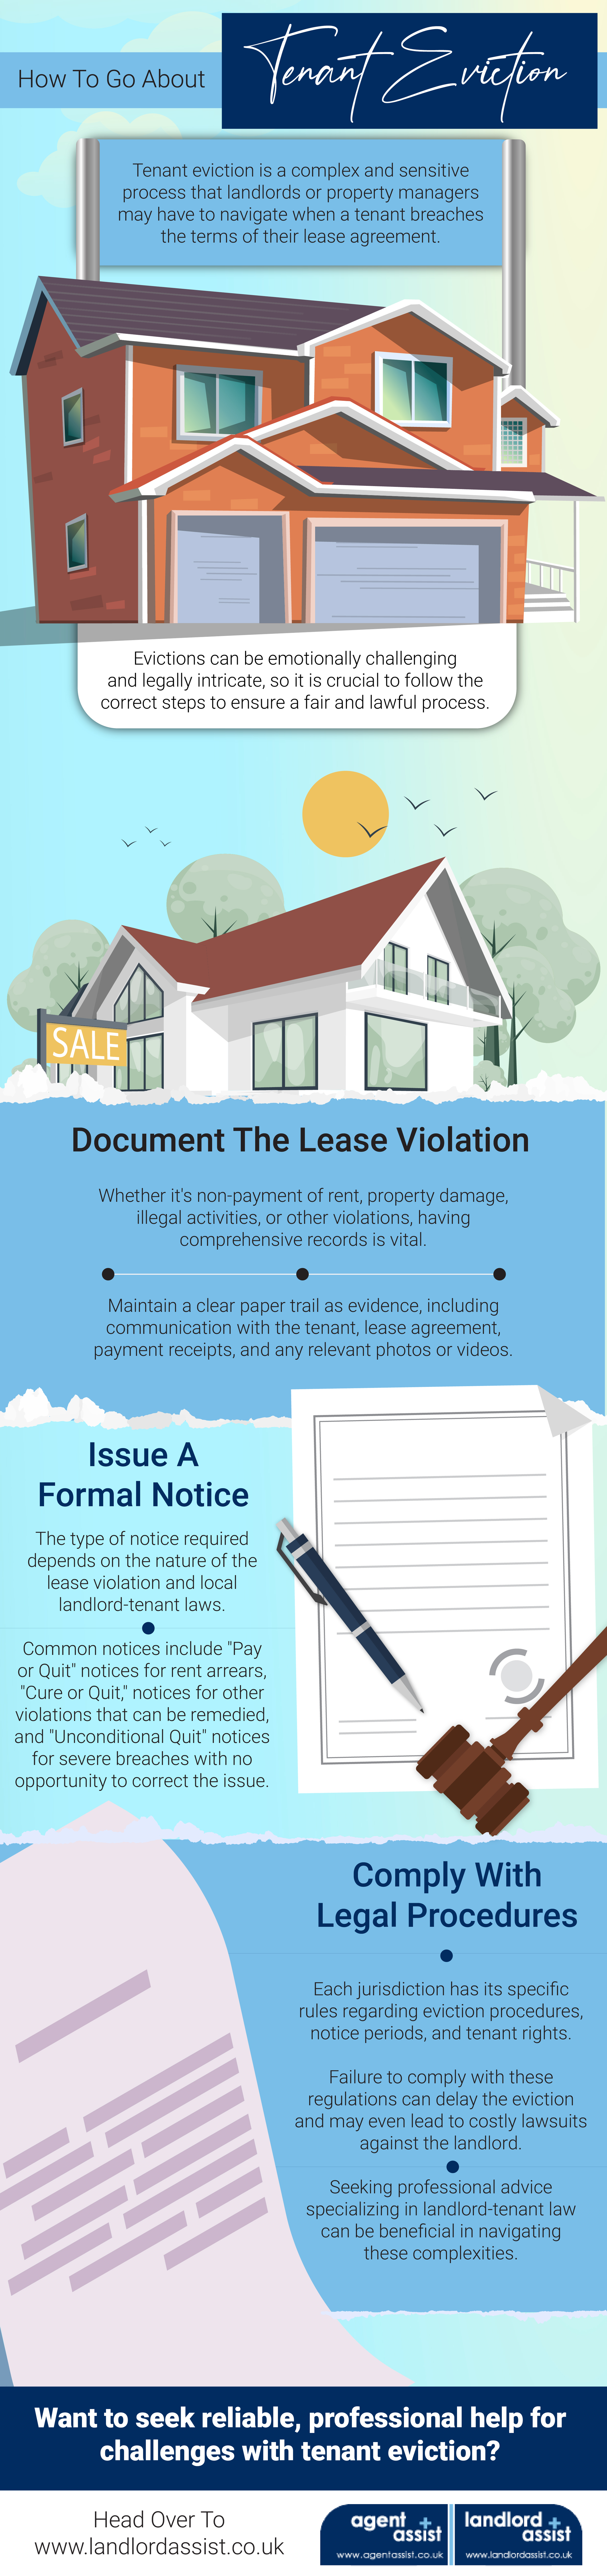 How To Go About Tenant Eviction